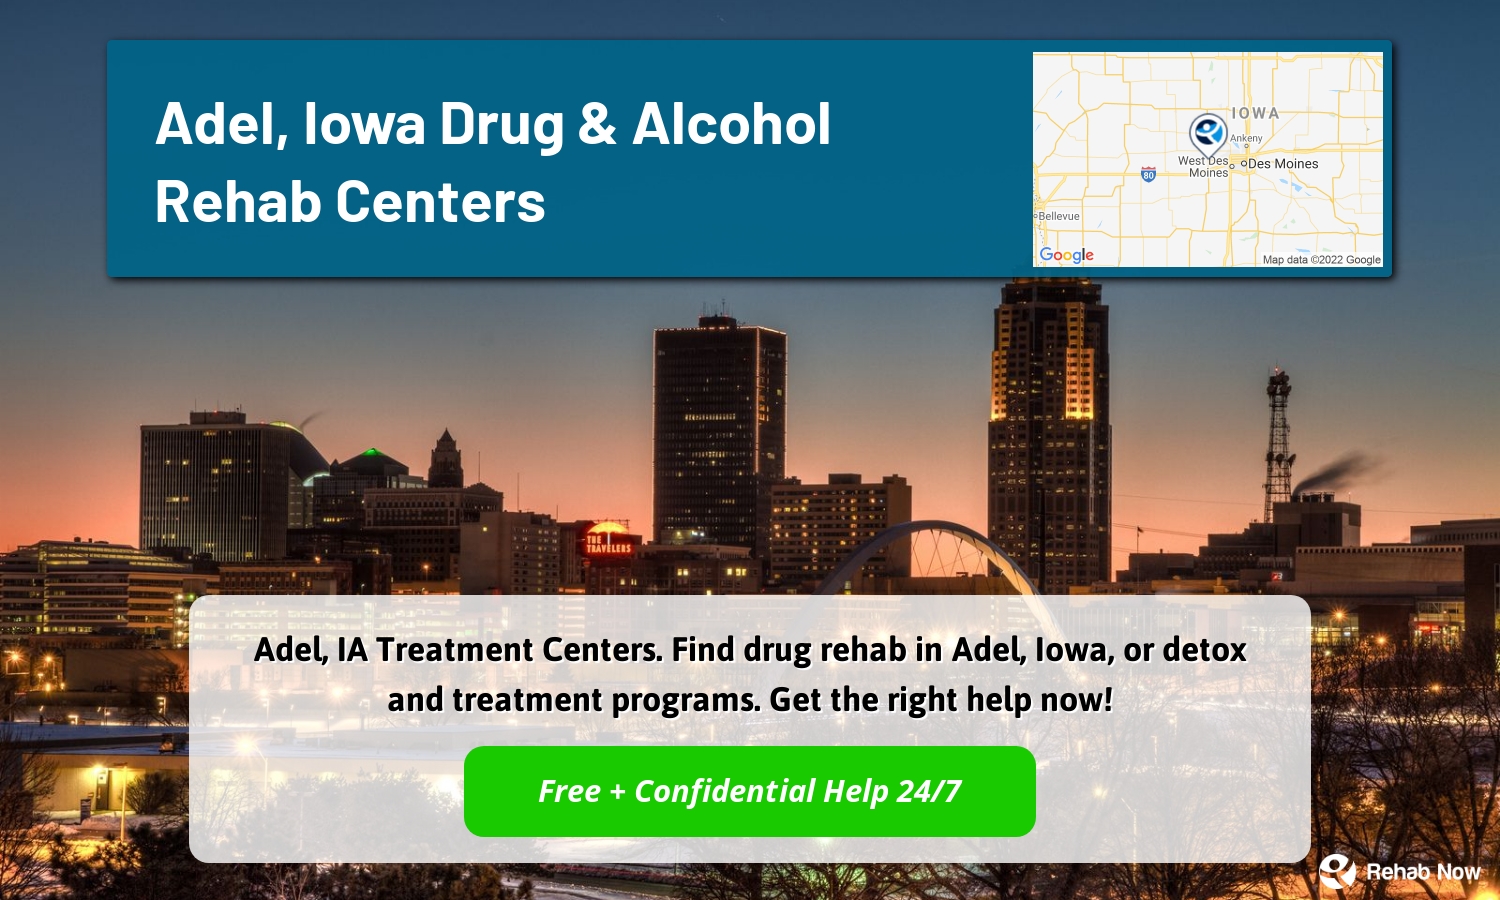 Adel, IA Treatment Centers. Find drug rehab in Adel, Iowa, or detox and treatment programs. Get the right help now!